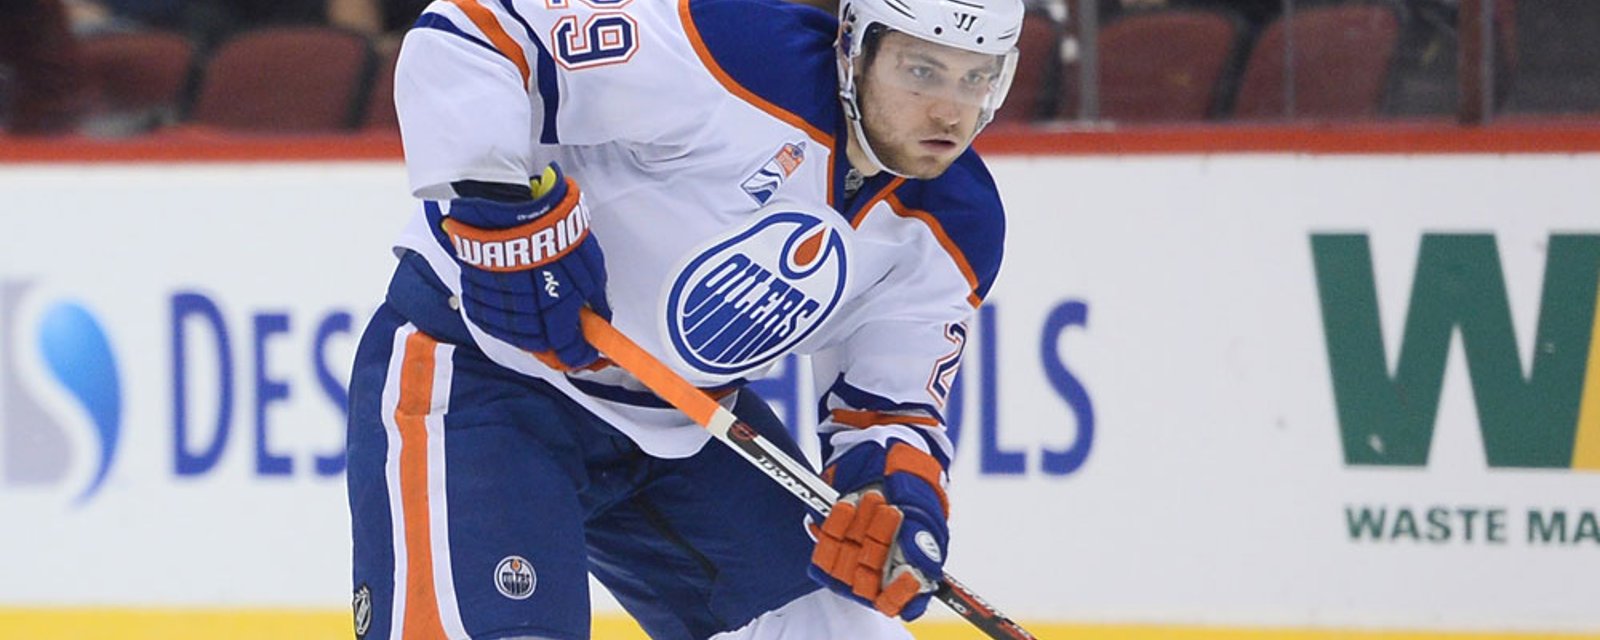 Breaking: Update on Draisaitl's concussion issues